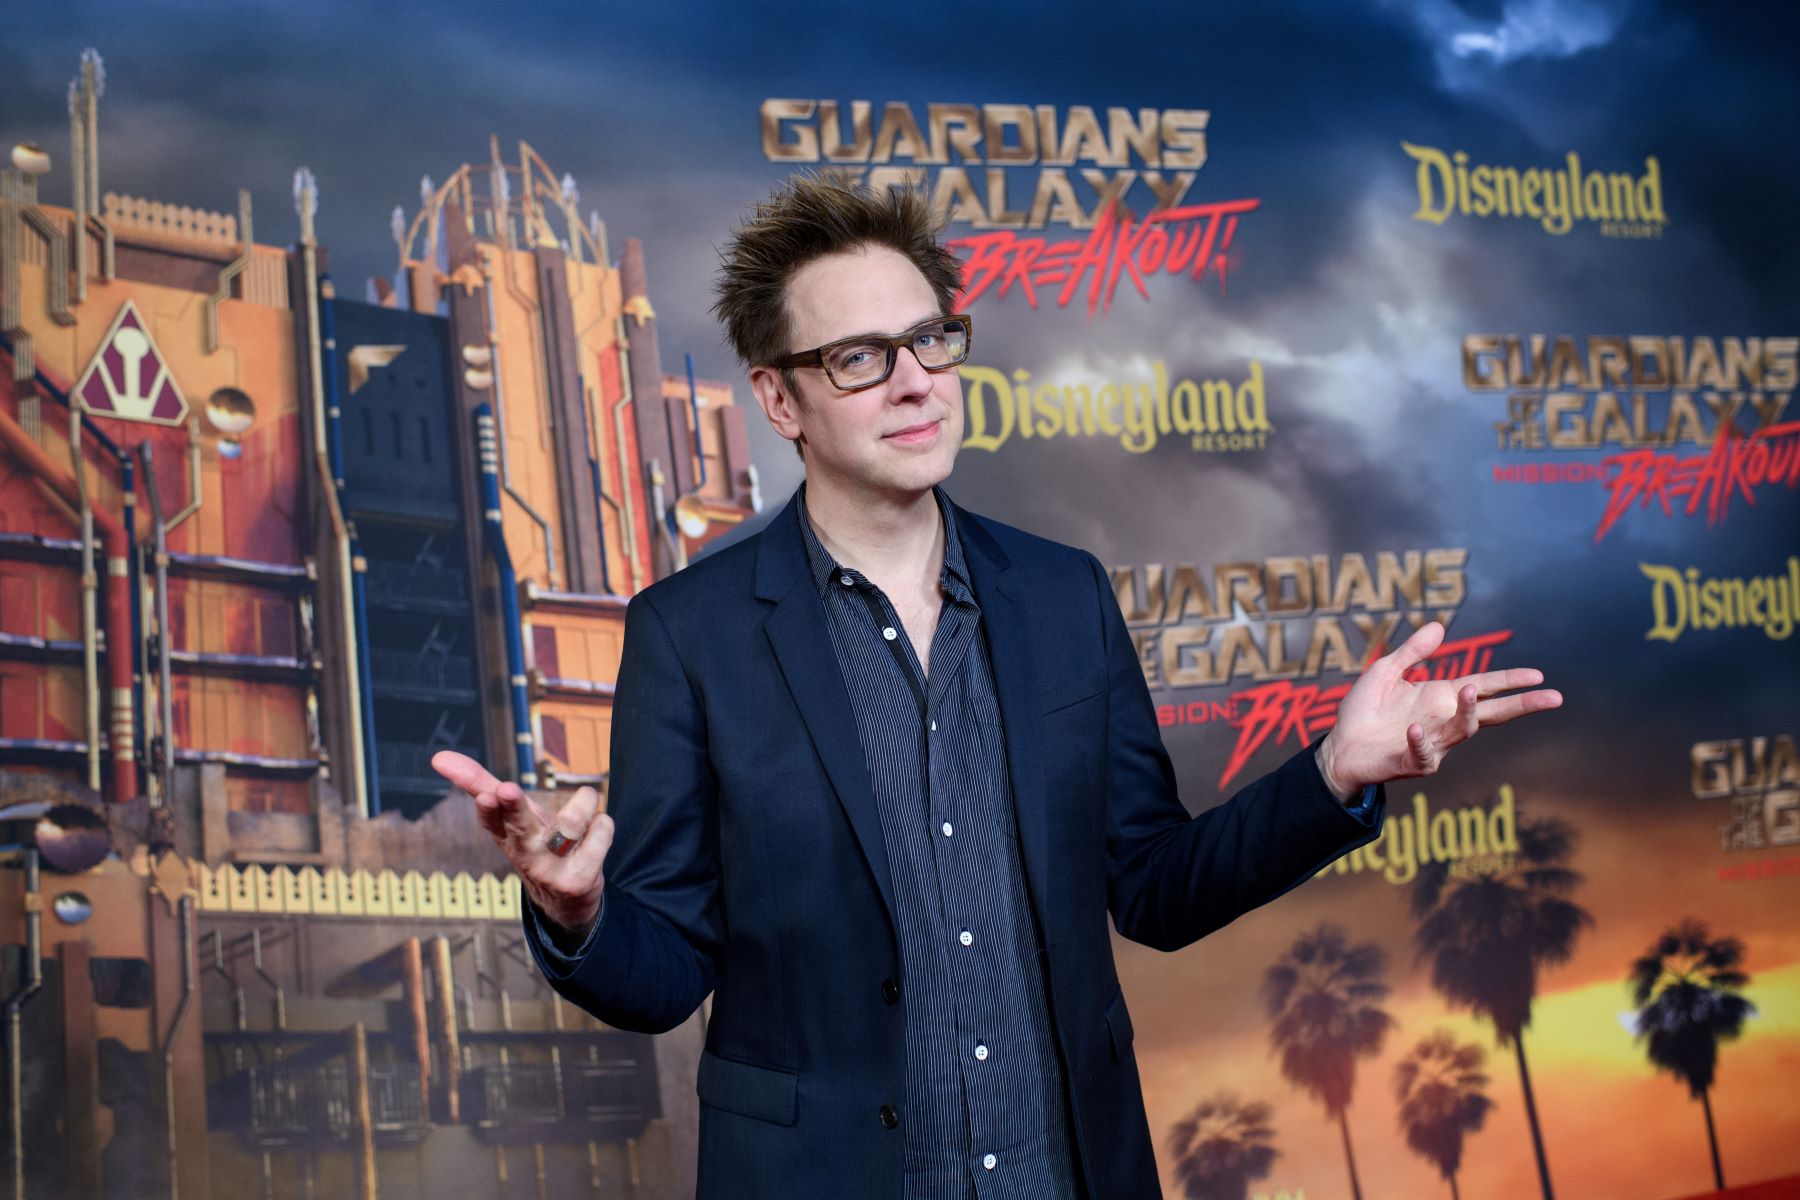 James Gunn, director of the 'Guardians of the Galaxy' films, wears a casual suit and a pair of glasses at the opening of a ride at Disneyland.